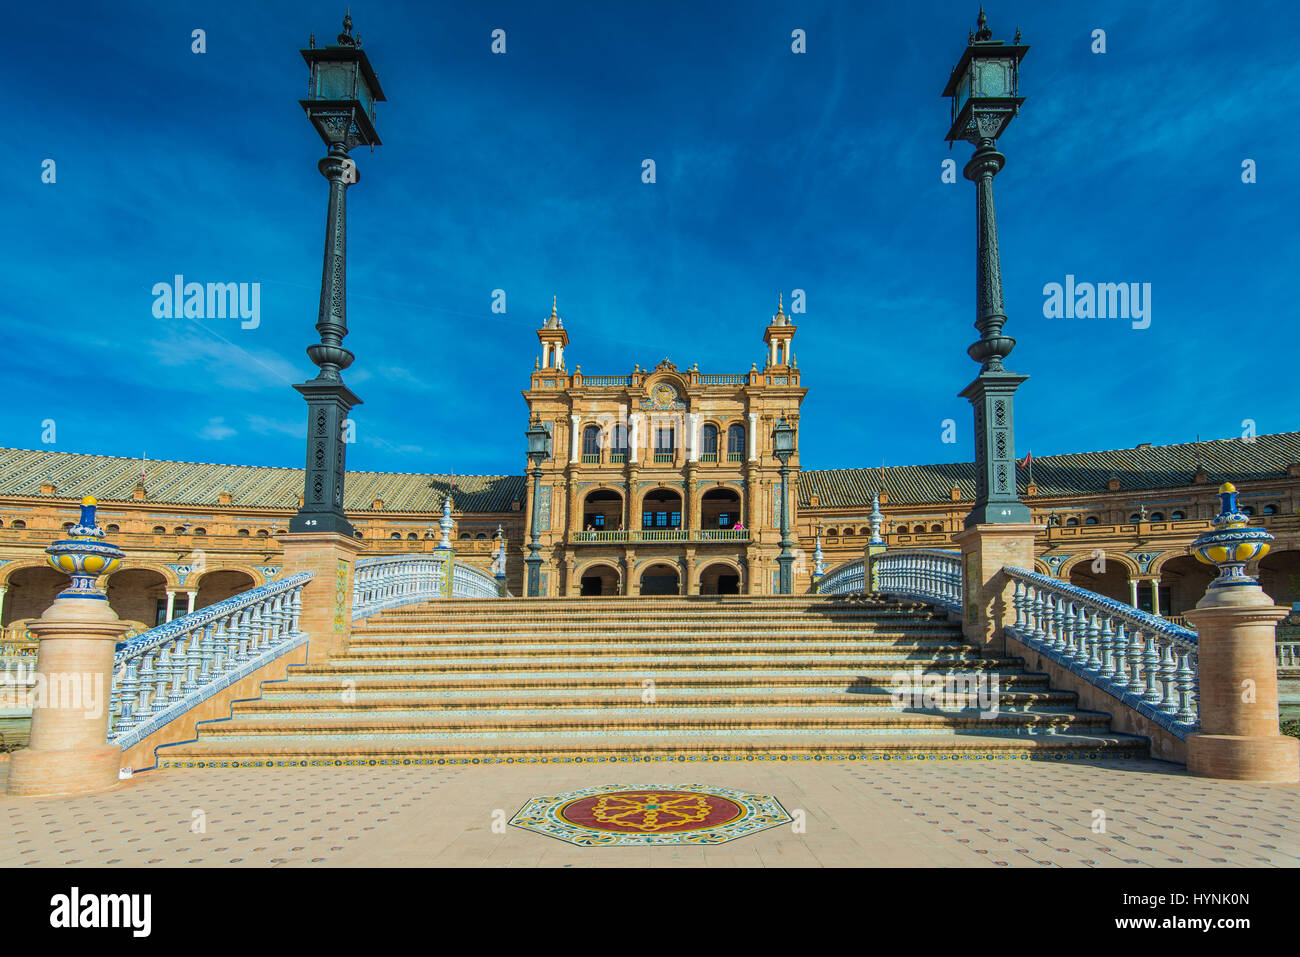 Plaza de Espana in Sevilla, Spain most famous and beautiful touristic place to visit. Stock Photo